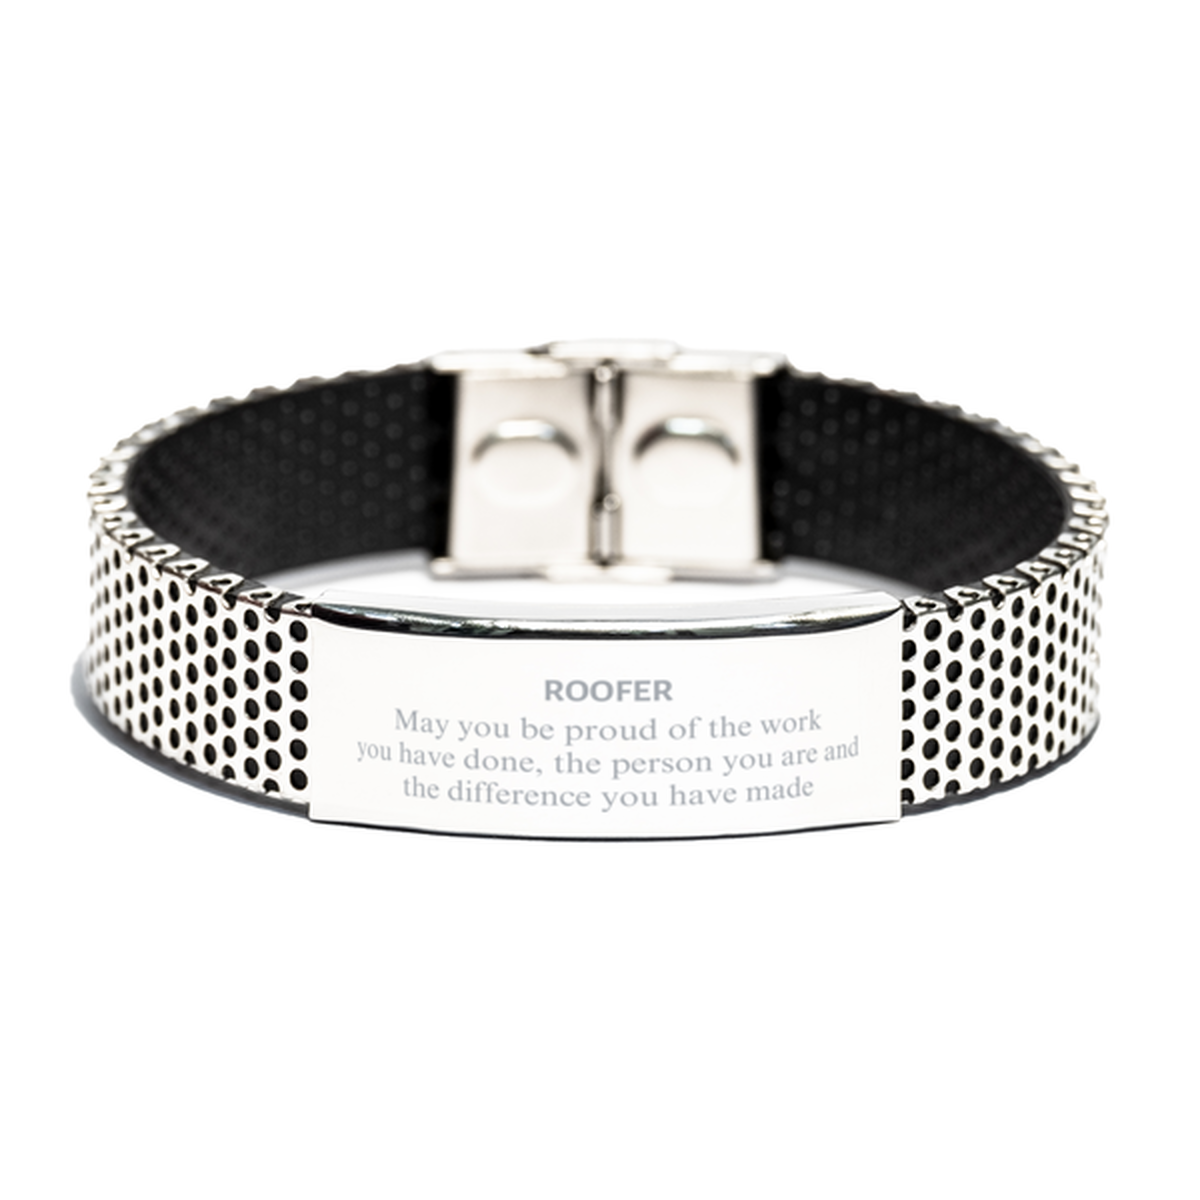 Roofer May you be proud of the work you have done, Retirement Roofer Stainless Steel Bracelet for Colleague Appreciation Gifts Amazing for Roofer